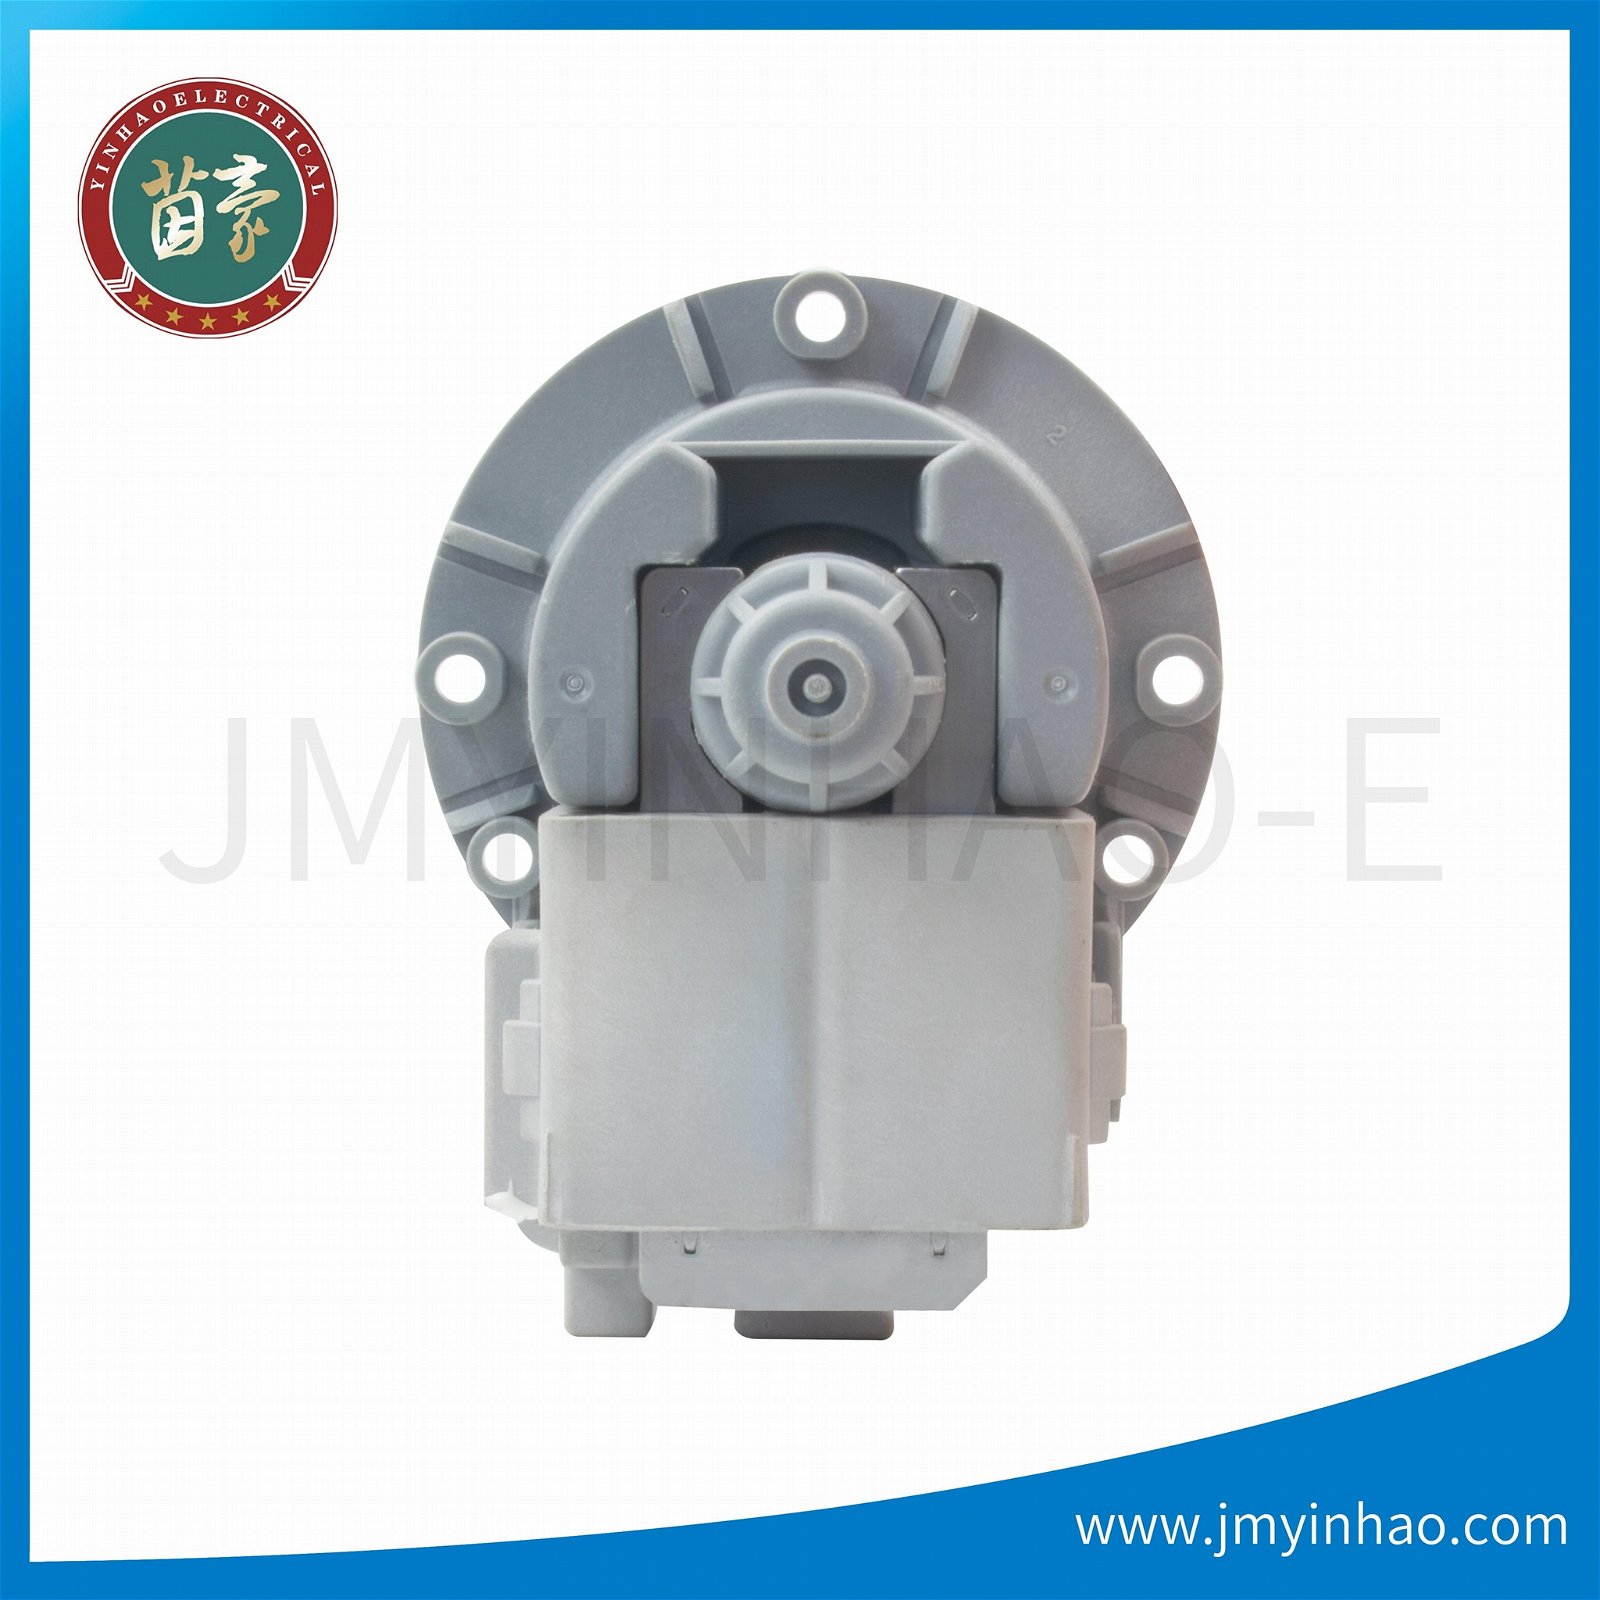 220V drain pump for vegetable and fruit washer 3